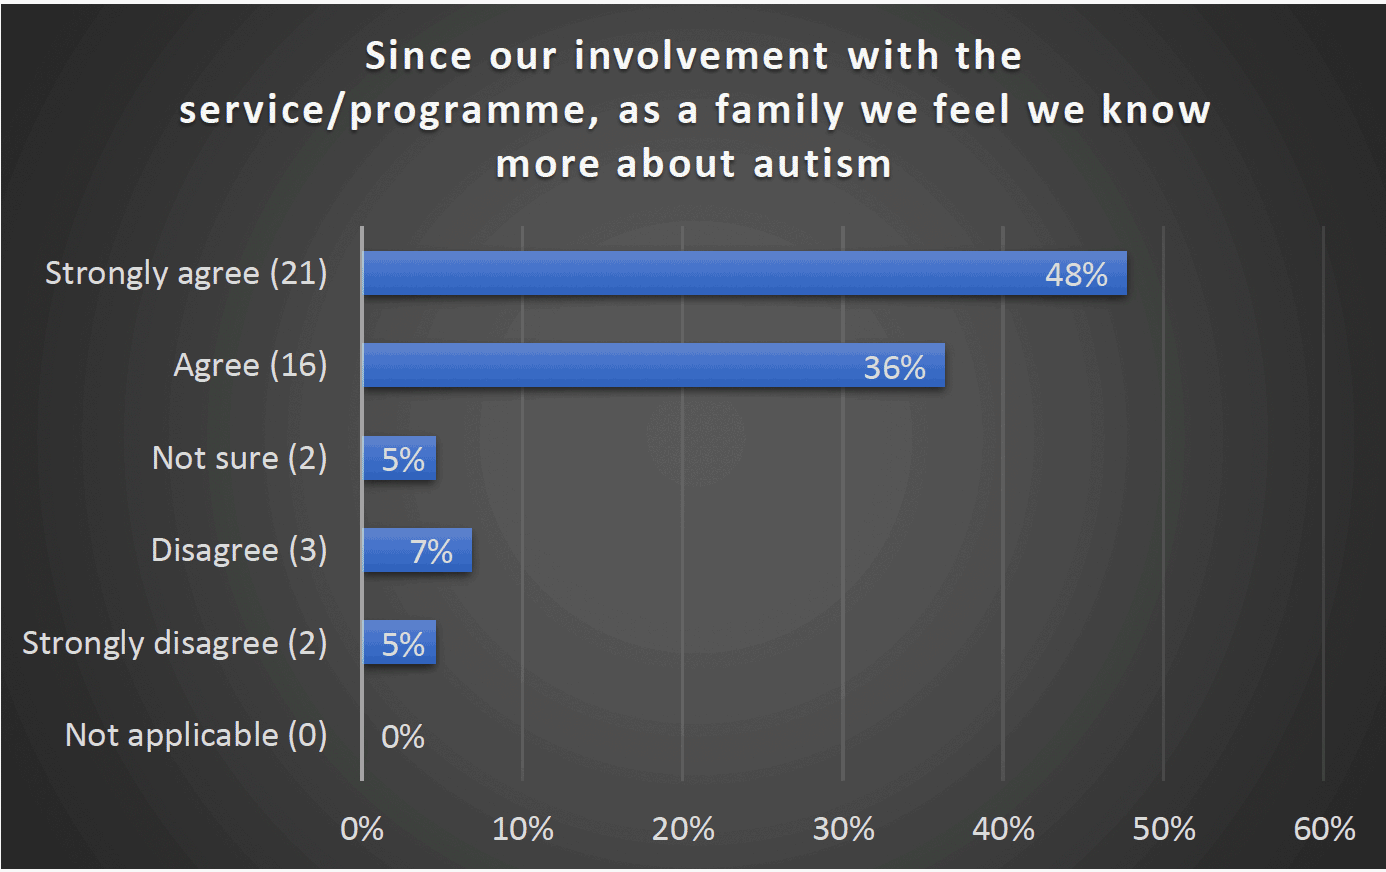 Since our involvement with the service/programme, as a family we feel we know more about autism - Strongly agree (21) 48%, Agree (16) 36%, Not sure (2) 5%, Disagree (3) 7%, Strongly disagree (2) 5%